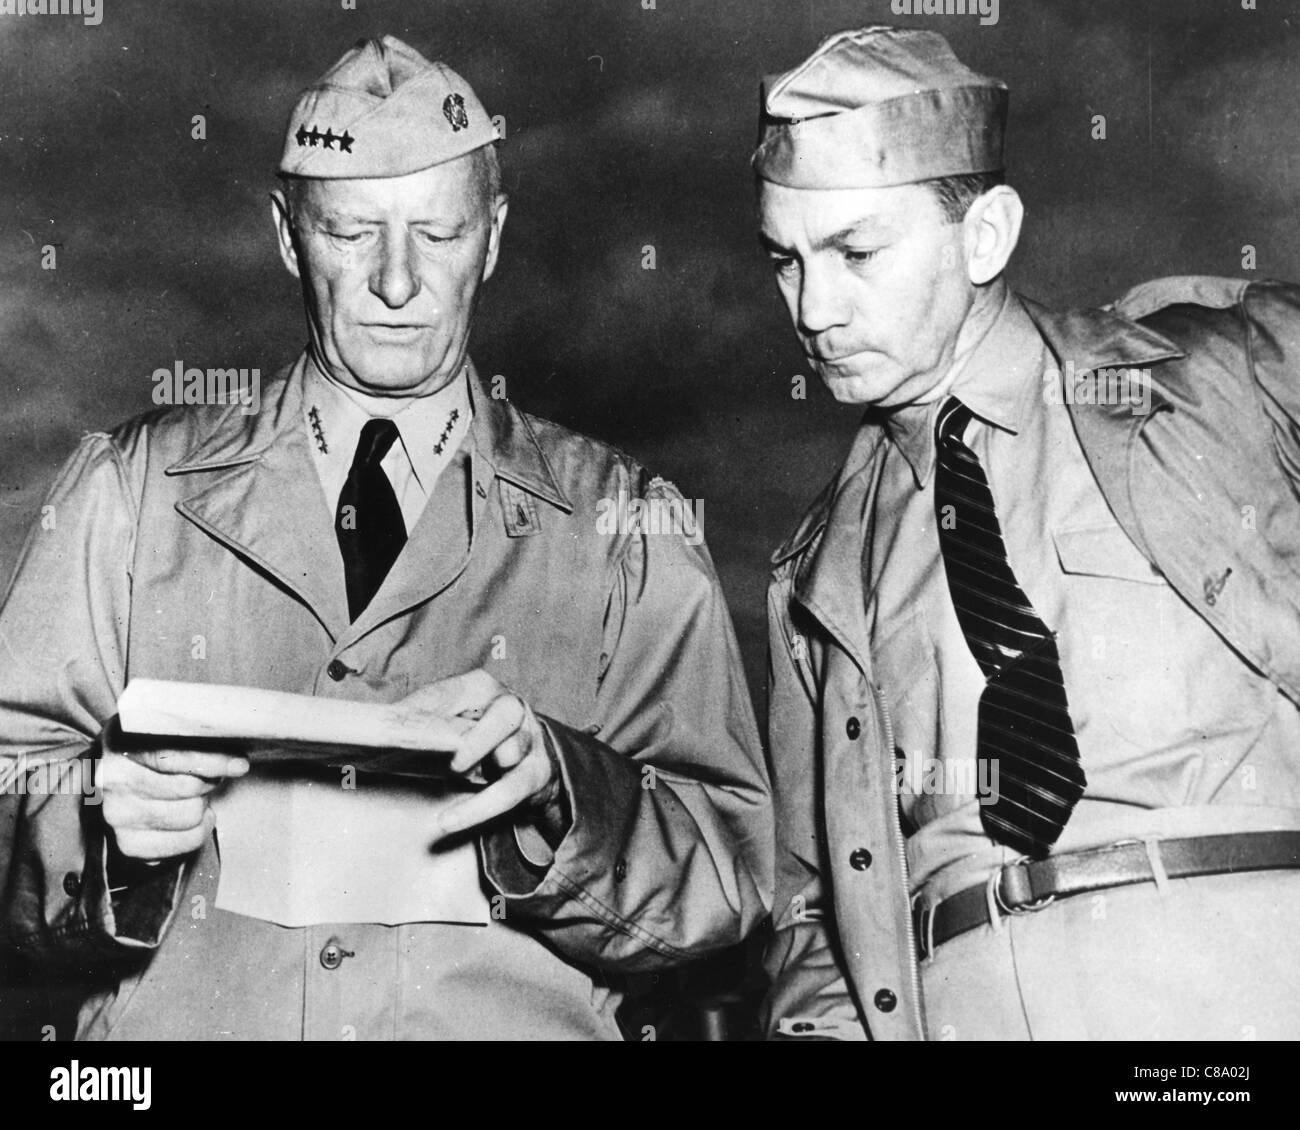 CHESTER NIMITZ (1885-1966)  C-inC of the US Pacific Fleet on 11 May 1944 with James Forrestal, Navy Under-Secretary Stock Photo